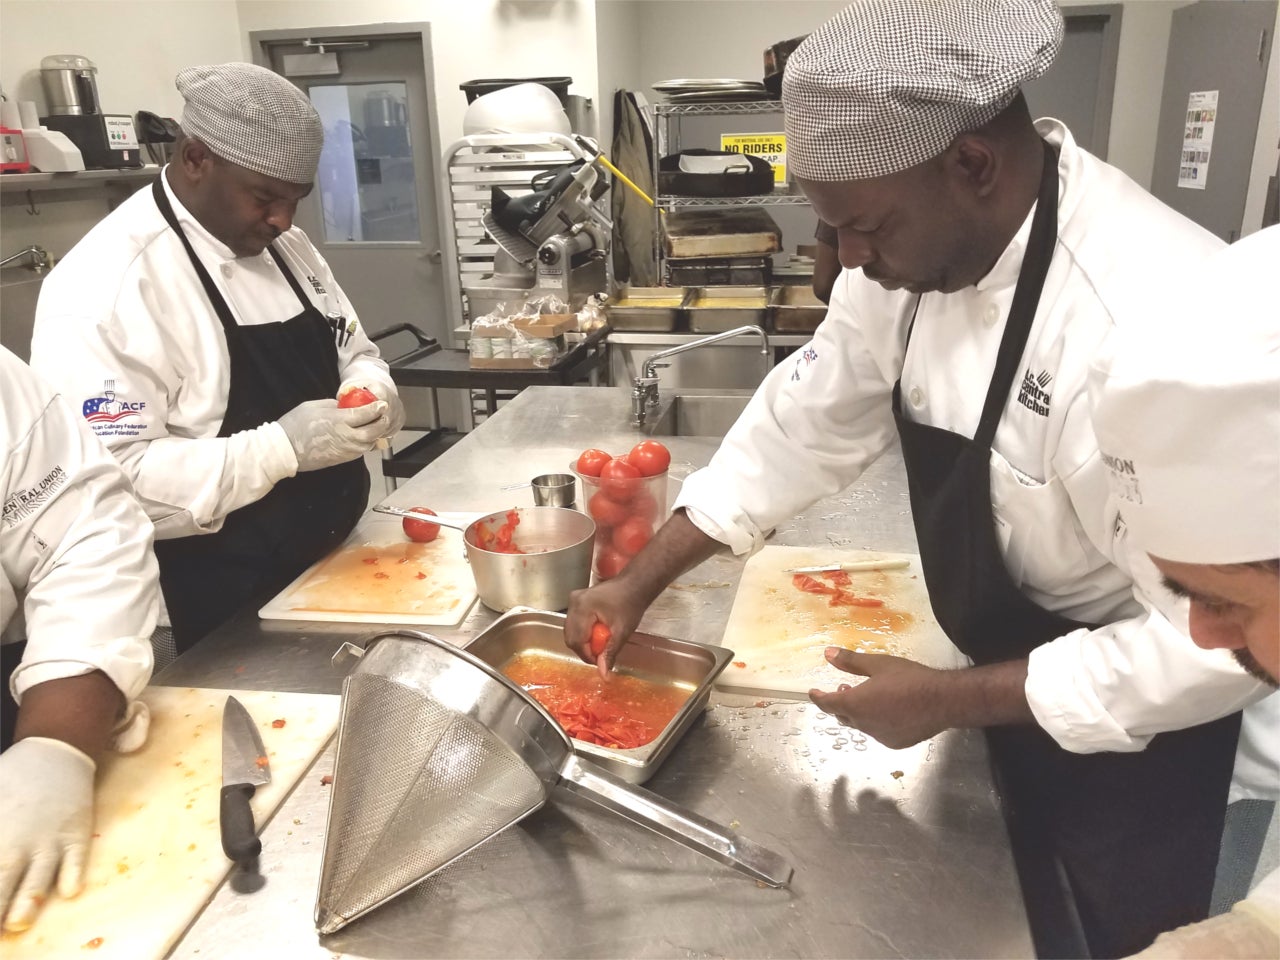 DC Central Kitchen Go-Team participants take part in the Culinary Job Training program